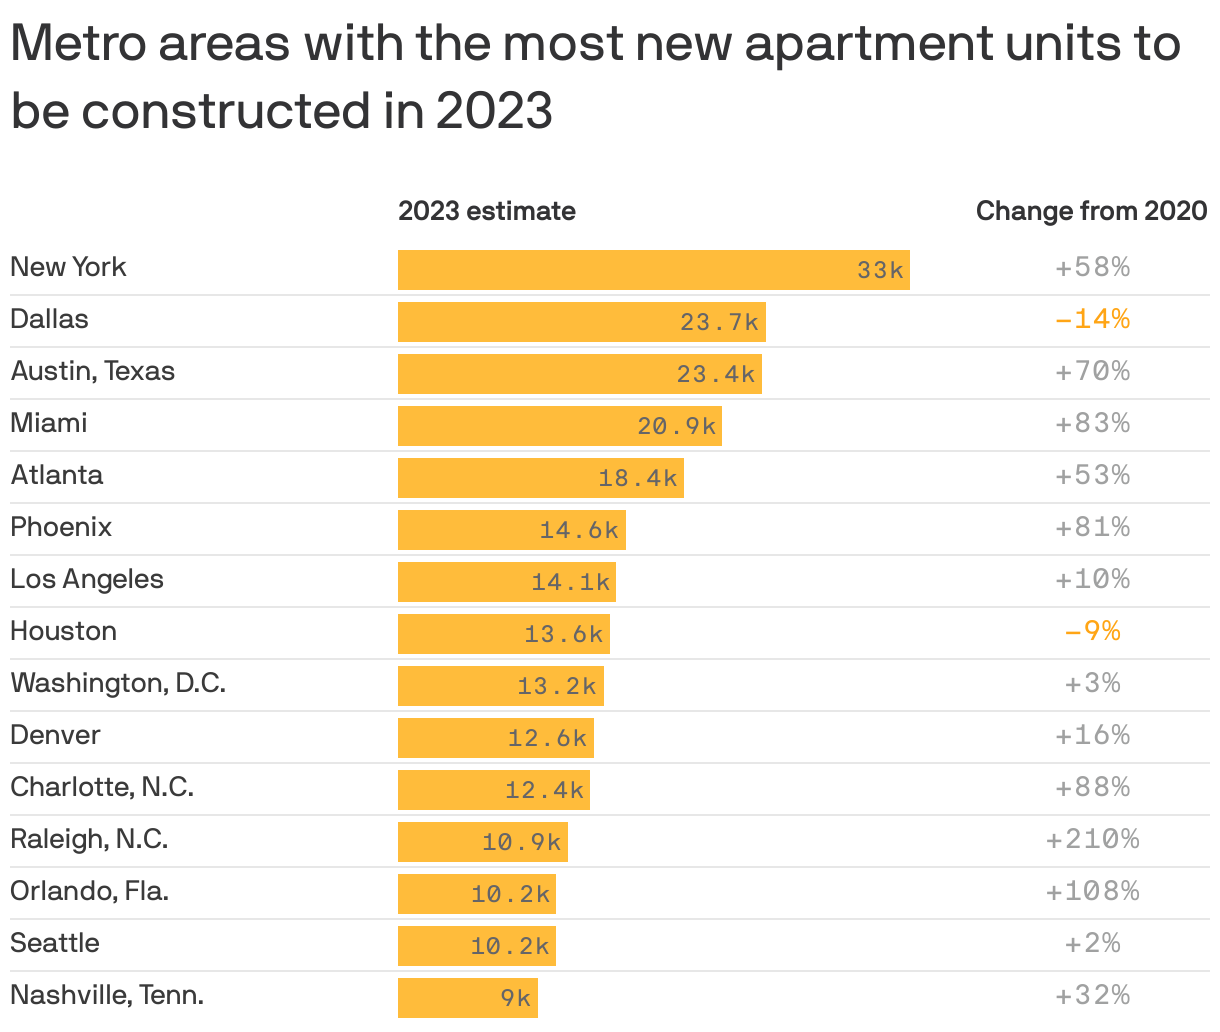 Metro areas with the most new apartment units to be constructed in 2023